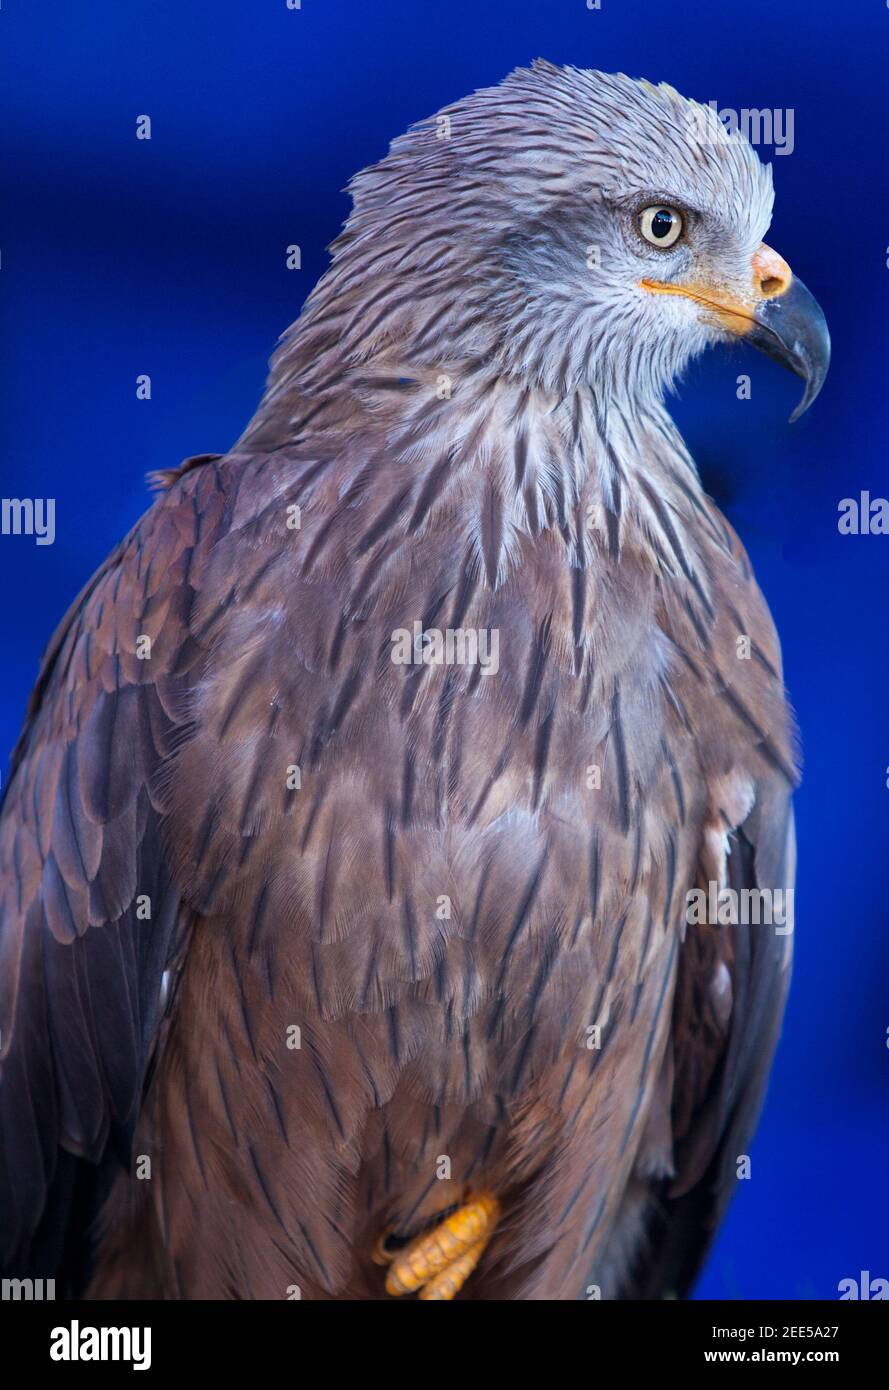 The red kite, Milvus milvus, a medium-large bird of prey in the family Accipitridae. Isolated over blue background Stock Photo